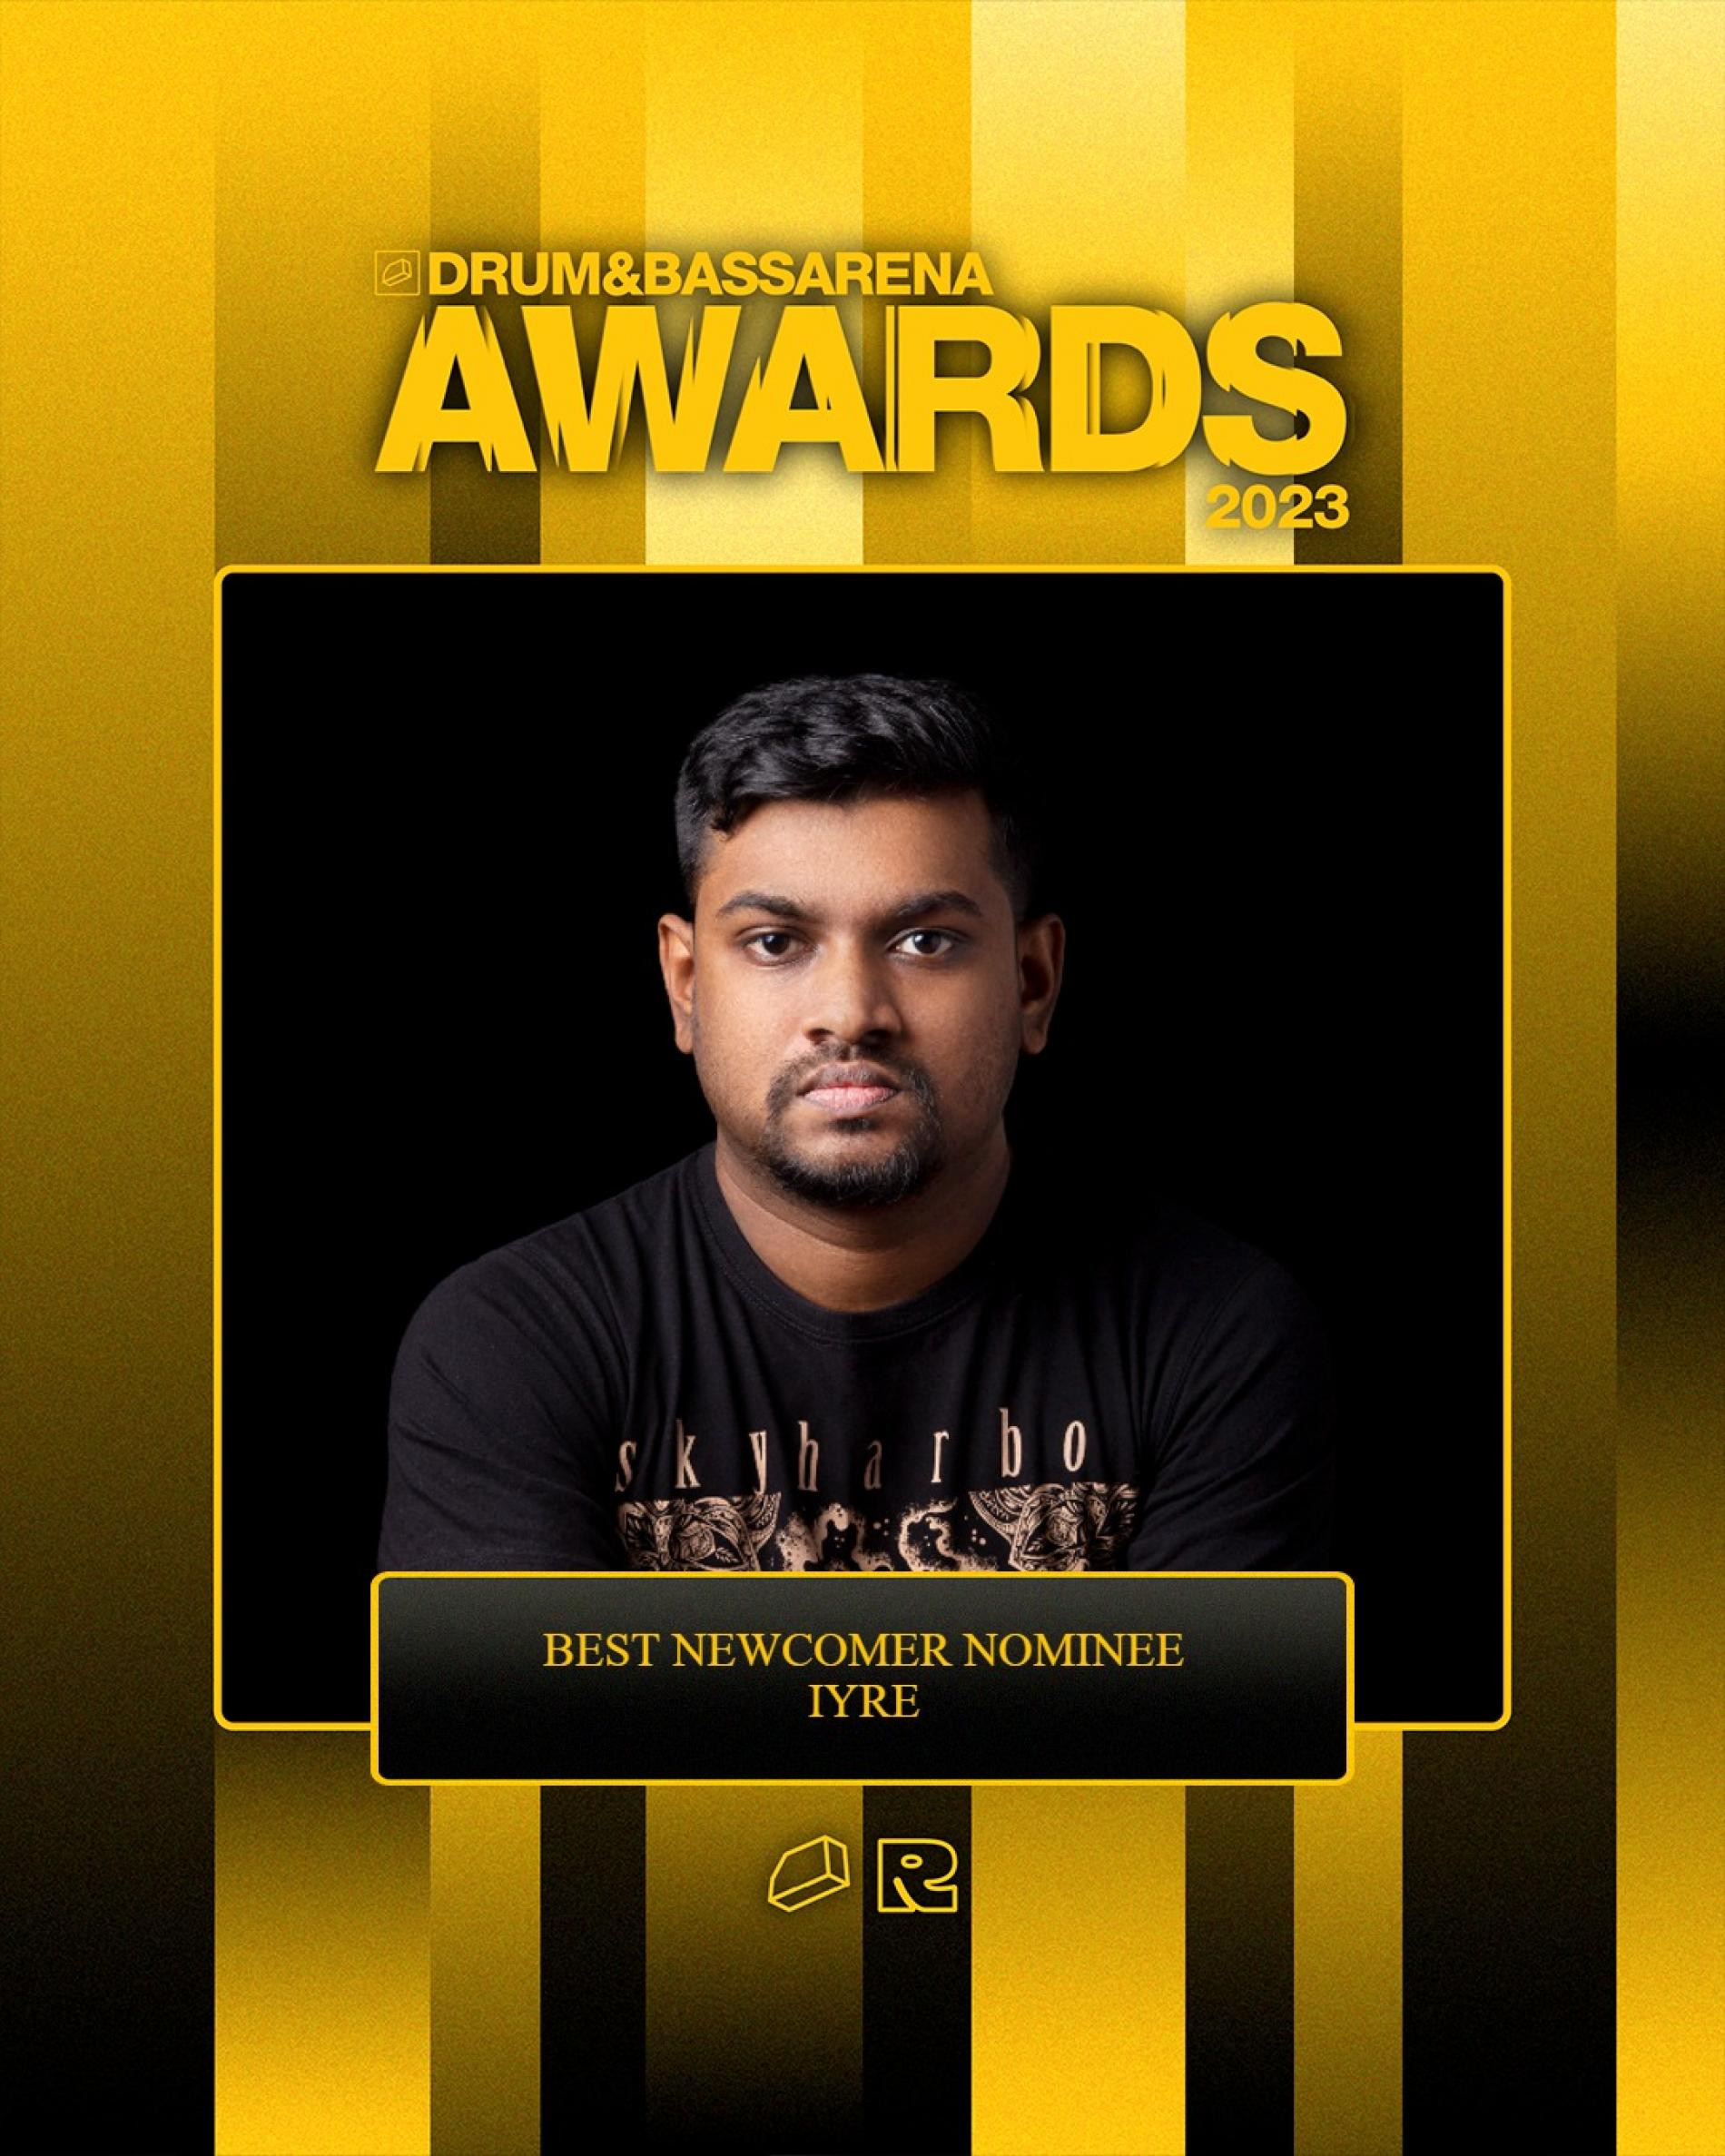 News : IYRE Is Nominated For A Drum N Bass Arena Award!